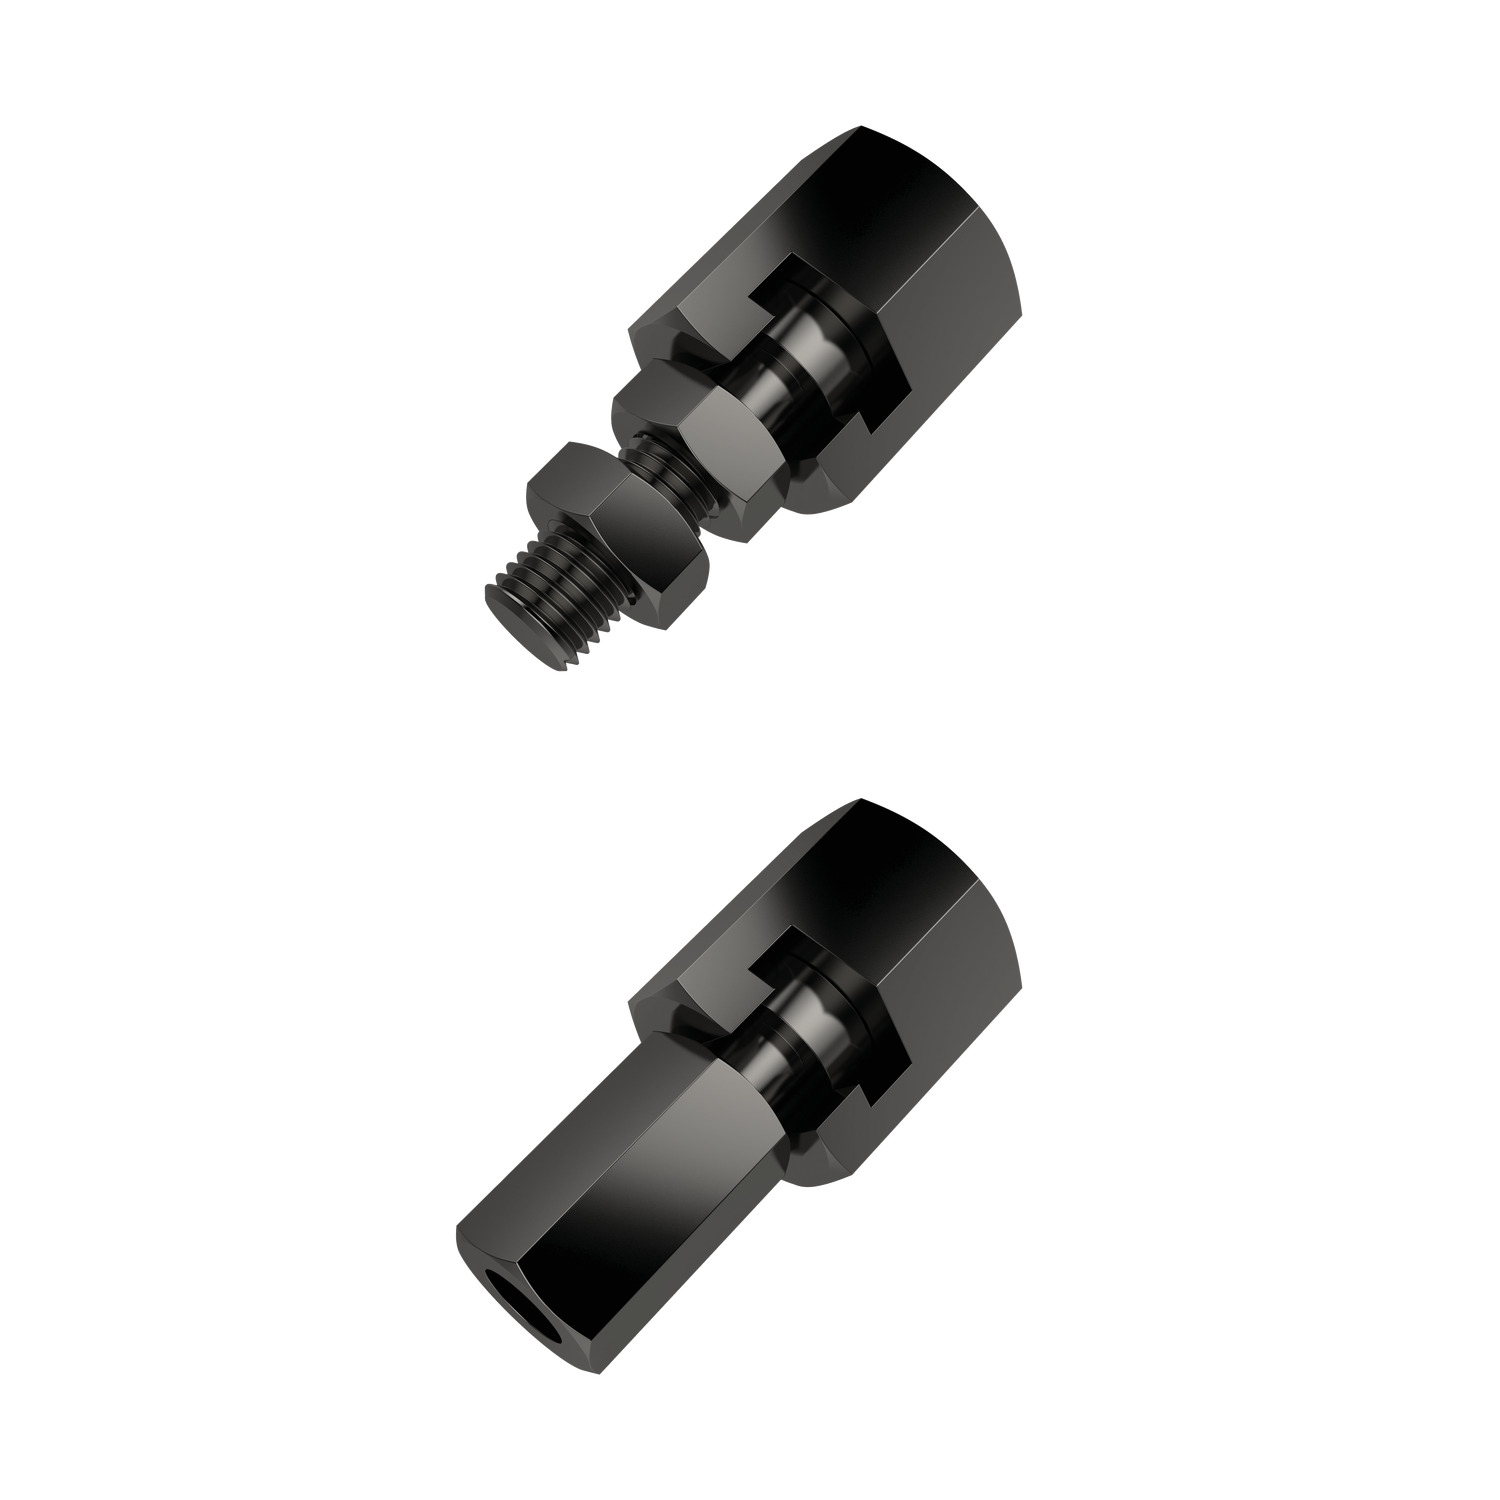 Quick Plug Couplings Quick plug couplings made from heat treated steel. For quick coupling/uncoupling of components within linear movement applications.